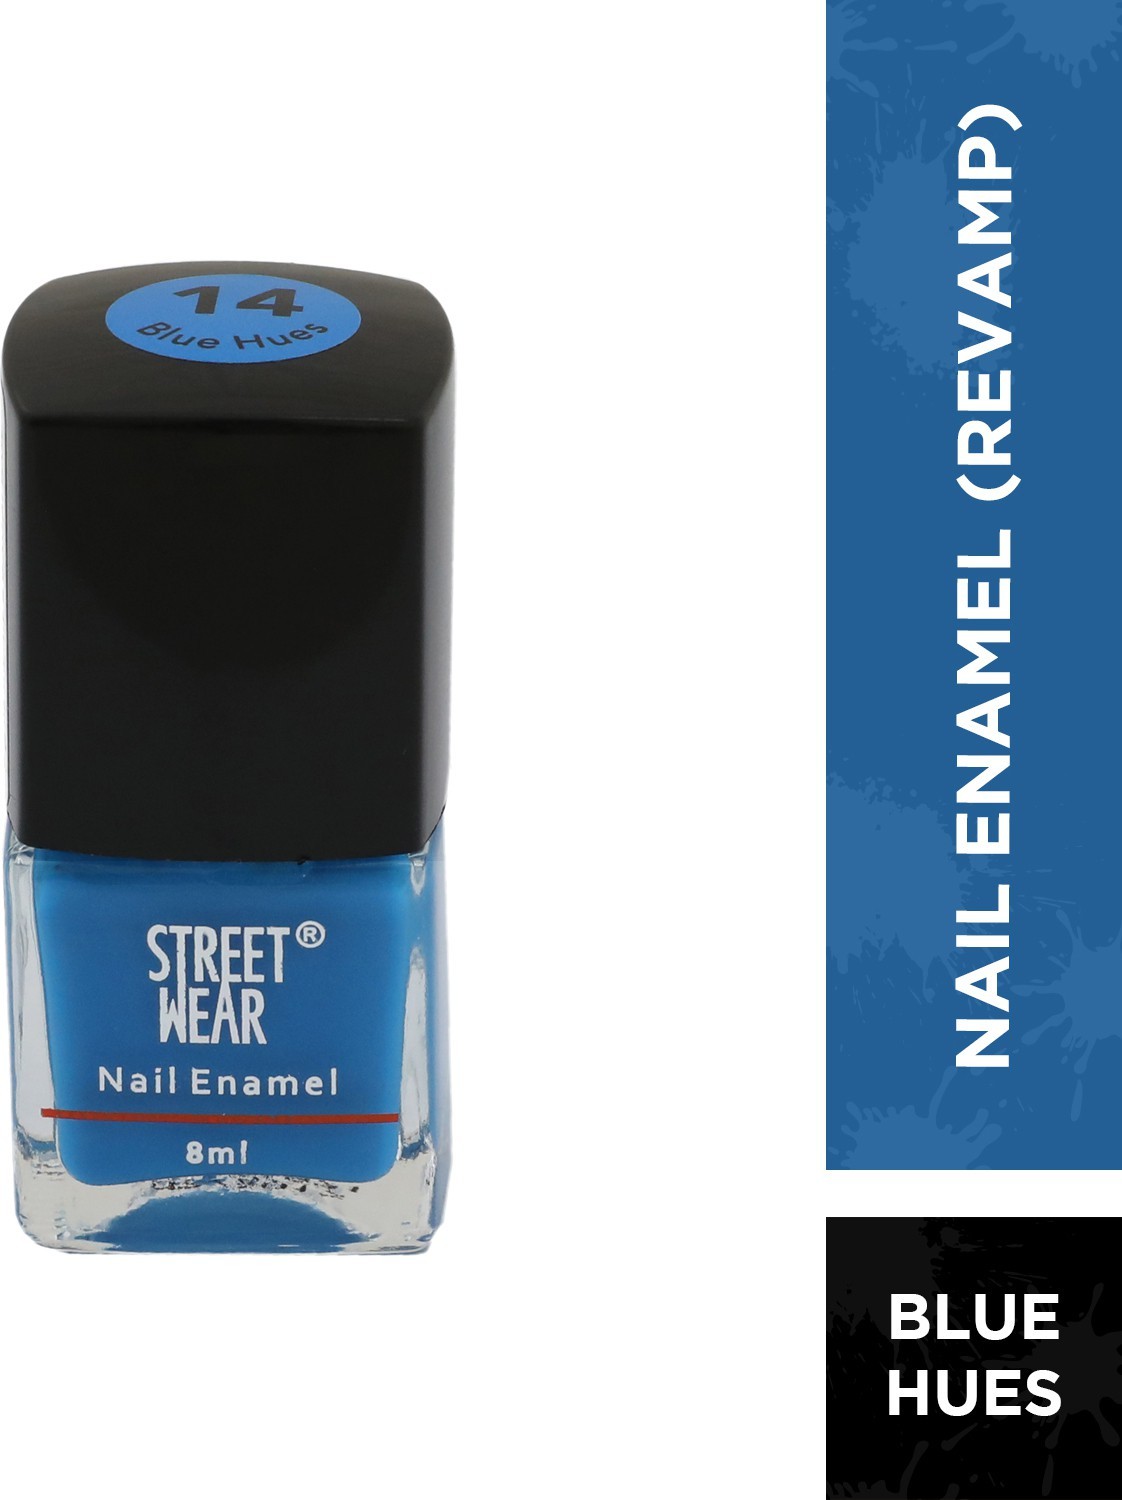 STREET WEAR Gloss Nail Enamel I Lead - Price in India, Buy STREET WEAR  Gloss Nail Enamel I Lead Online In India, Reviews, Ratings & Features |  Flipkart.com